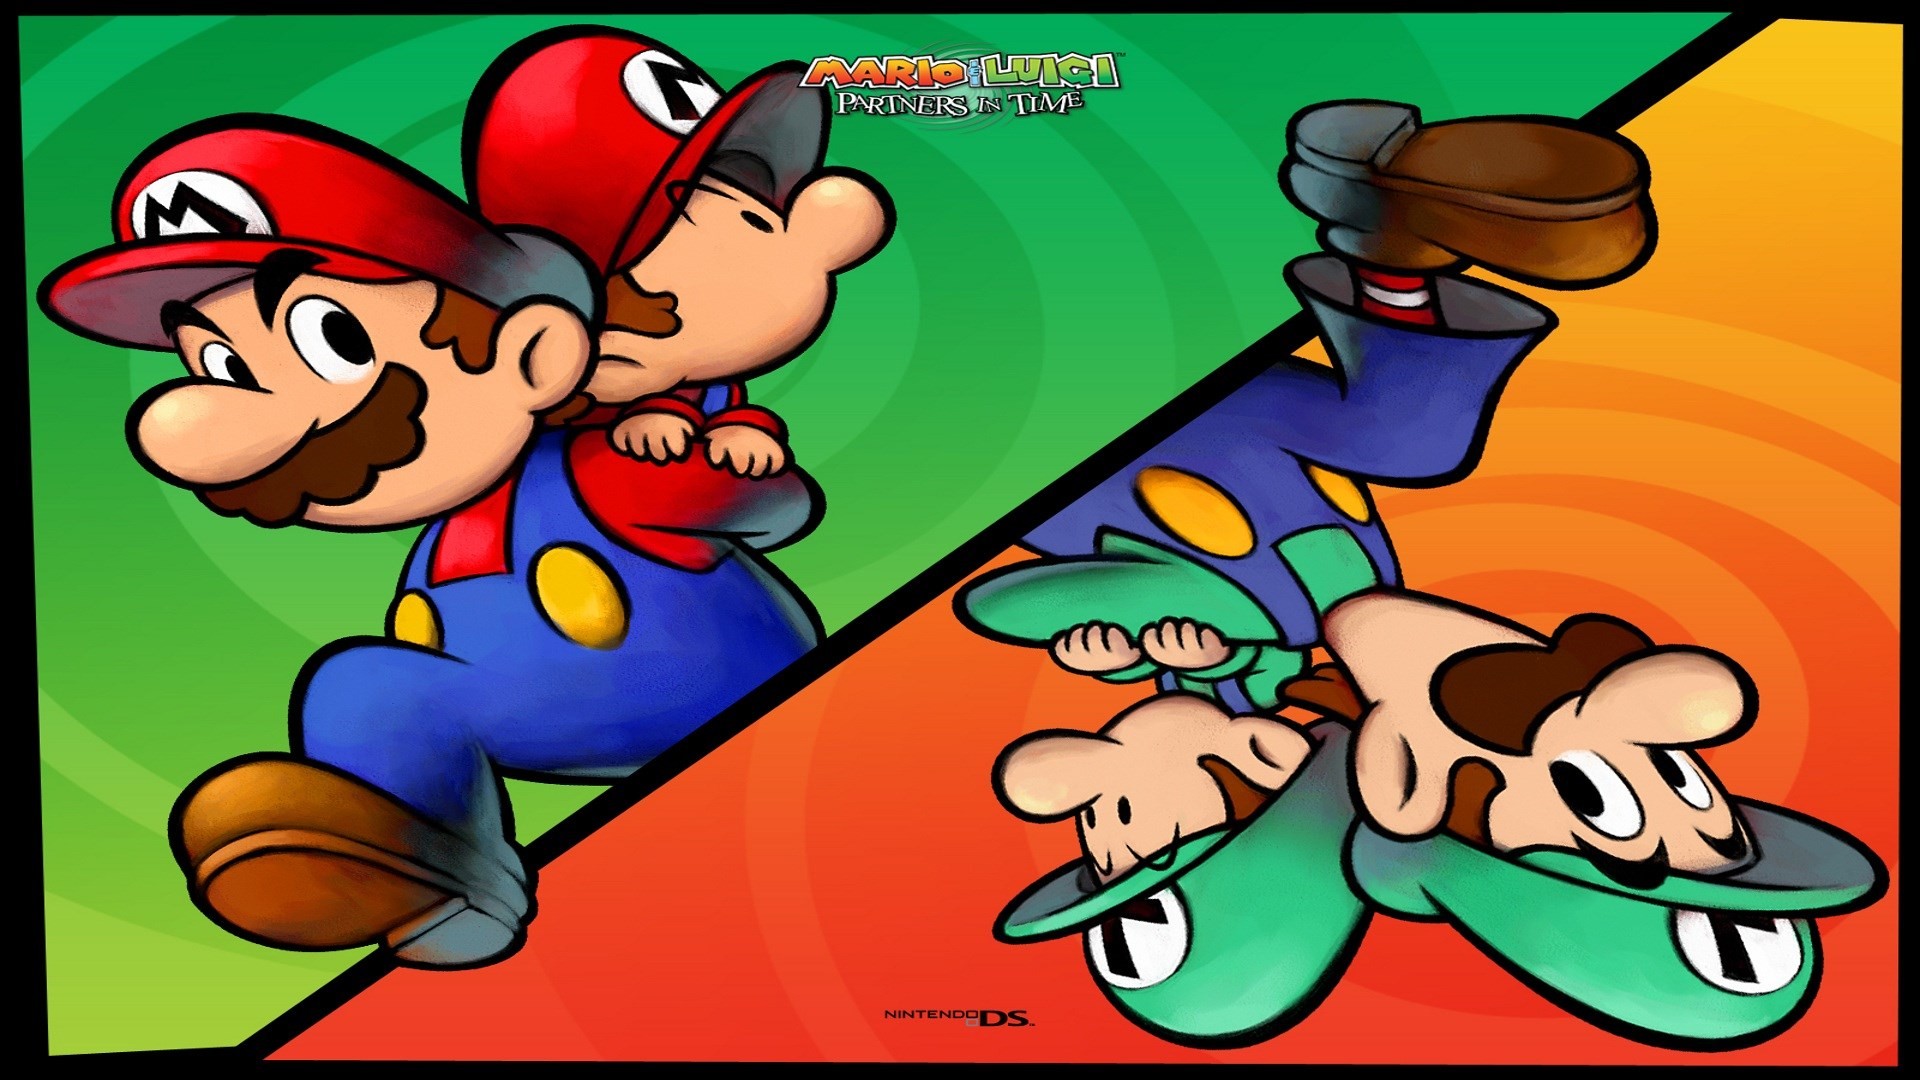 1920x1080 mario and luigi partners in time wallpaper free - mario and luigi partners  in time category